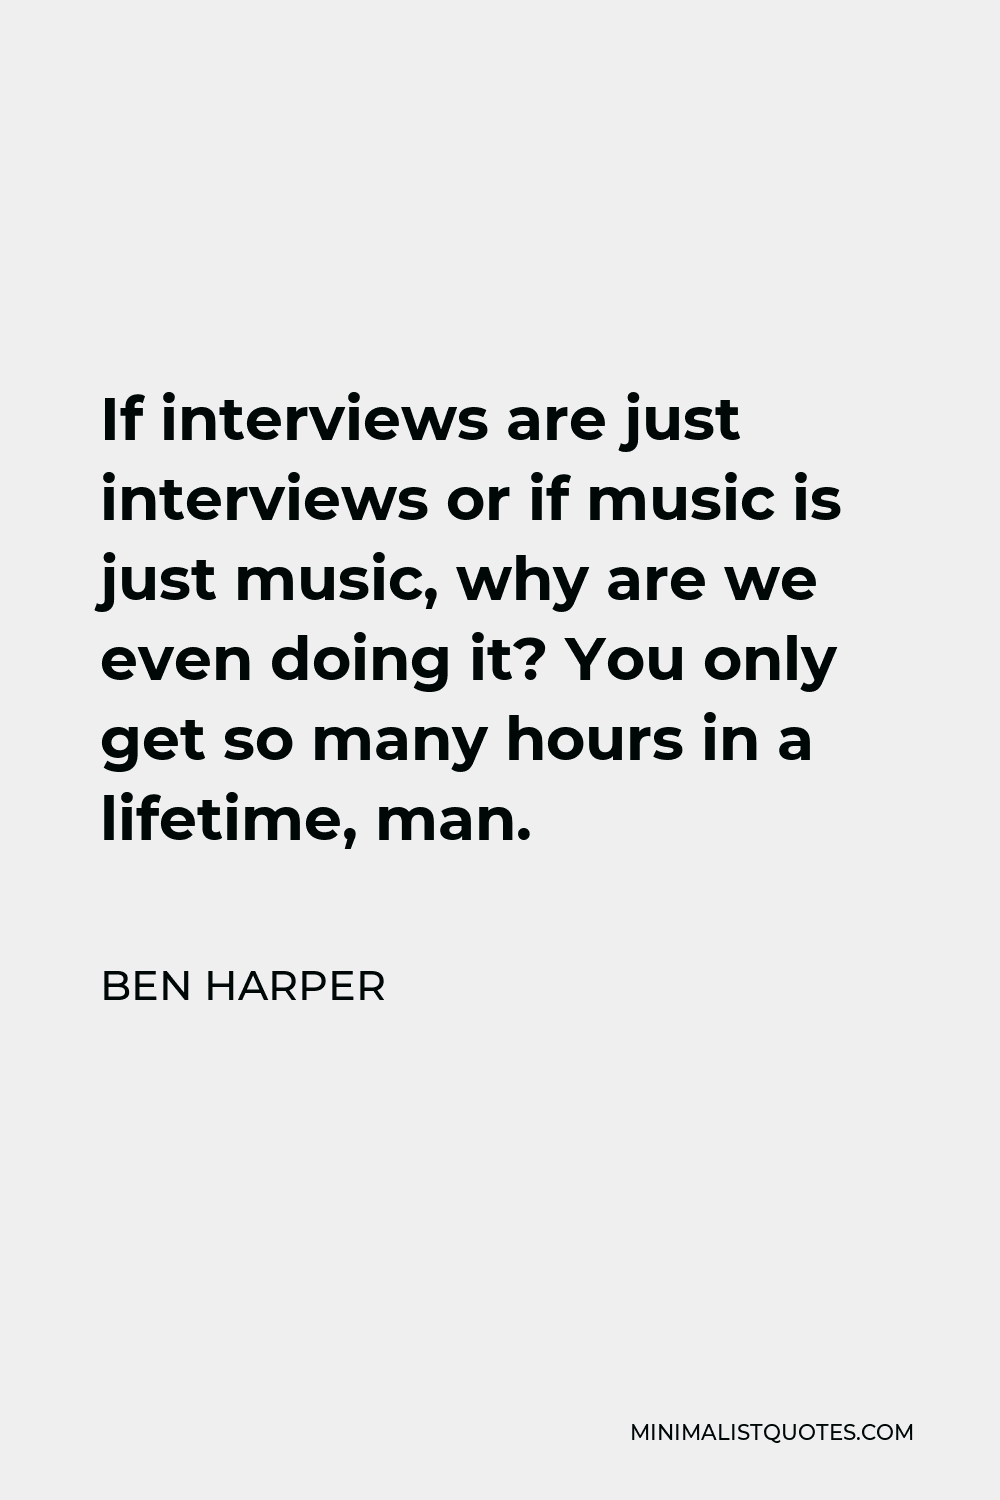 Ben Harper Quote - If interviews are just interviews or if music is just music, why are we even doing it? You only get so many hours in a lifetime, man.